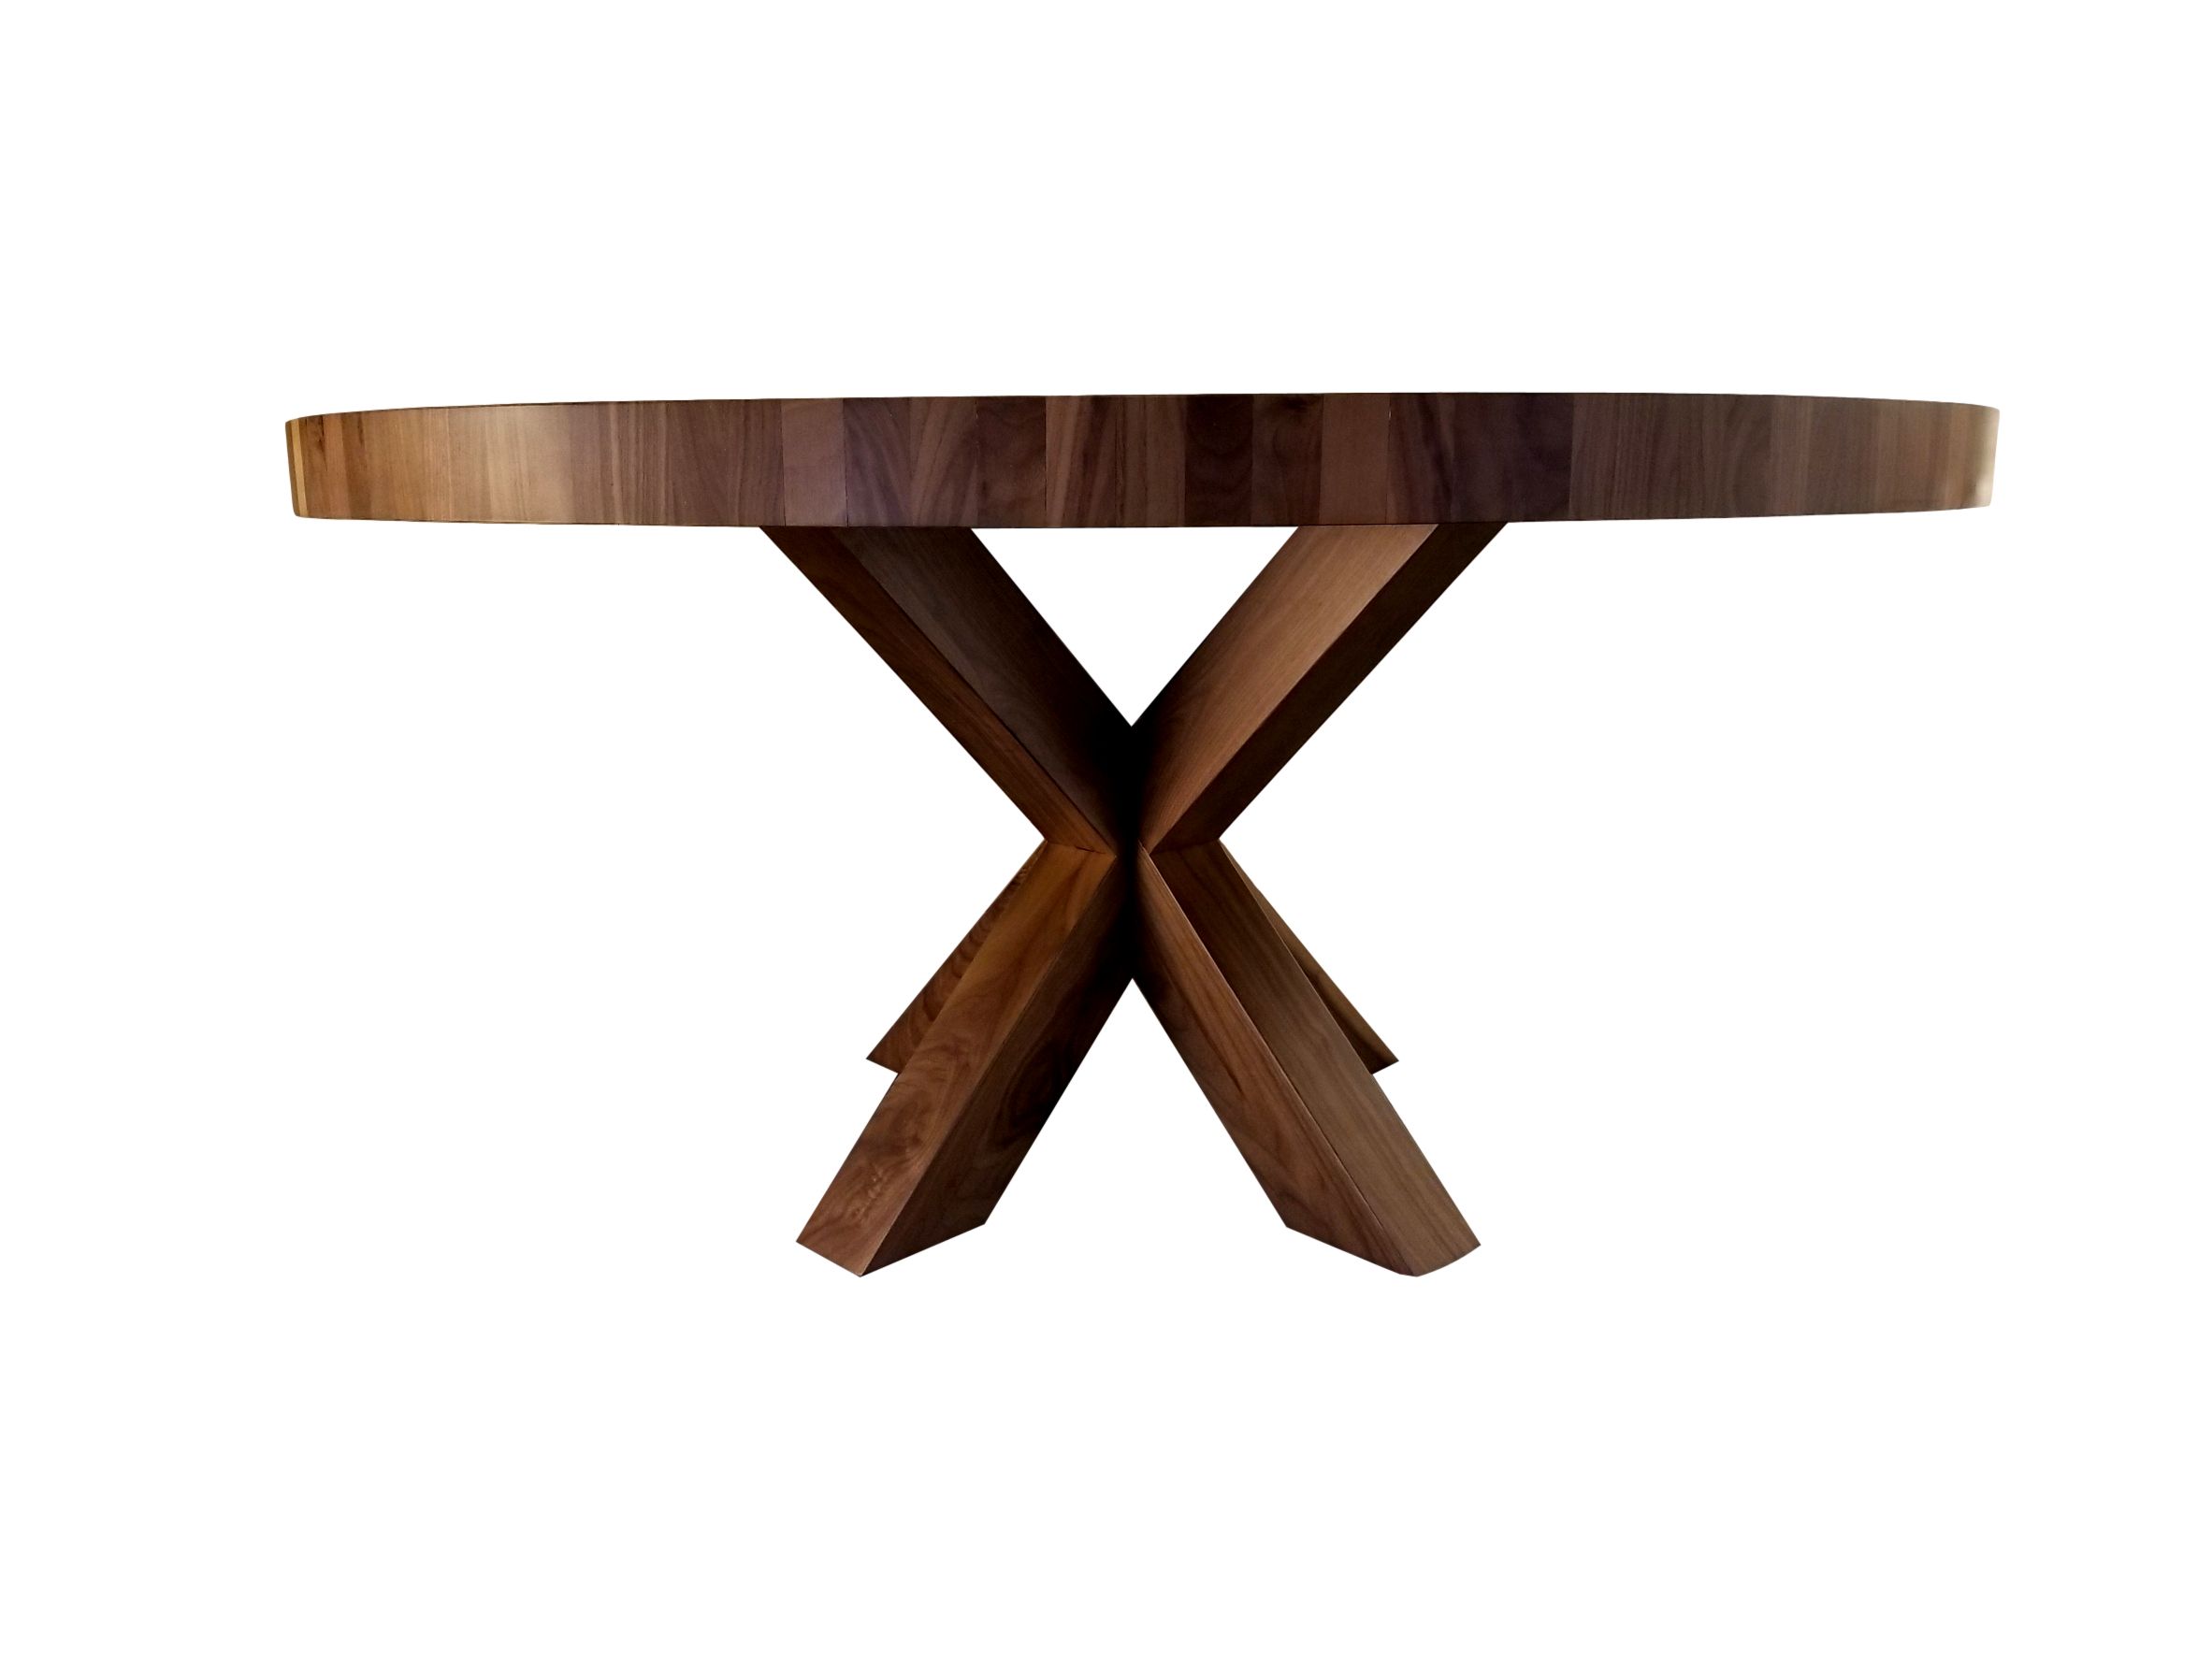 X Base Dining Table In 2019 | Table, Pedestal Dining Table Inside Most Popular Bartol Reclaimed Dining Tables (View 15 of 25)